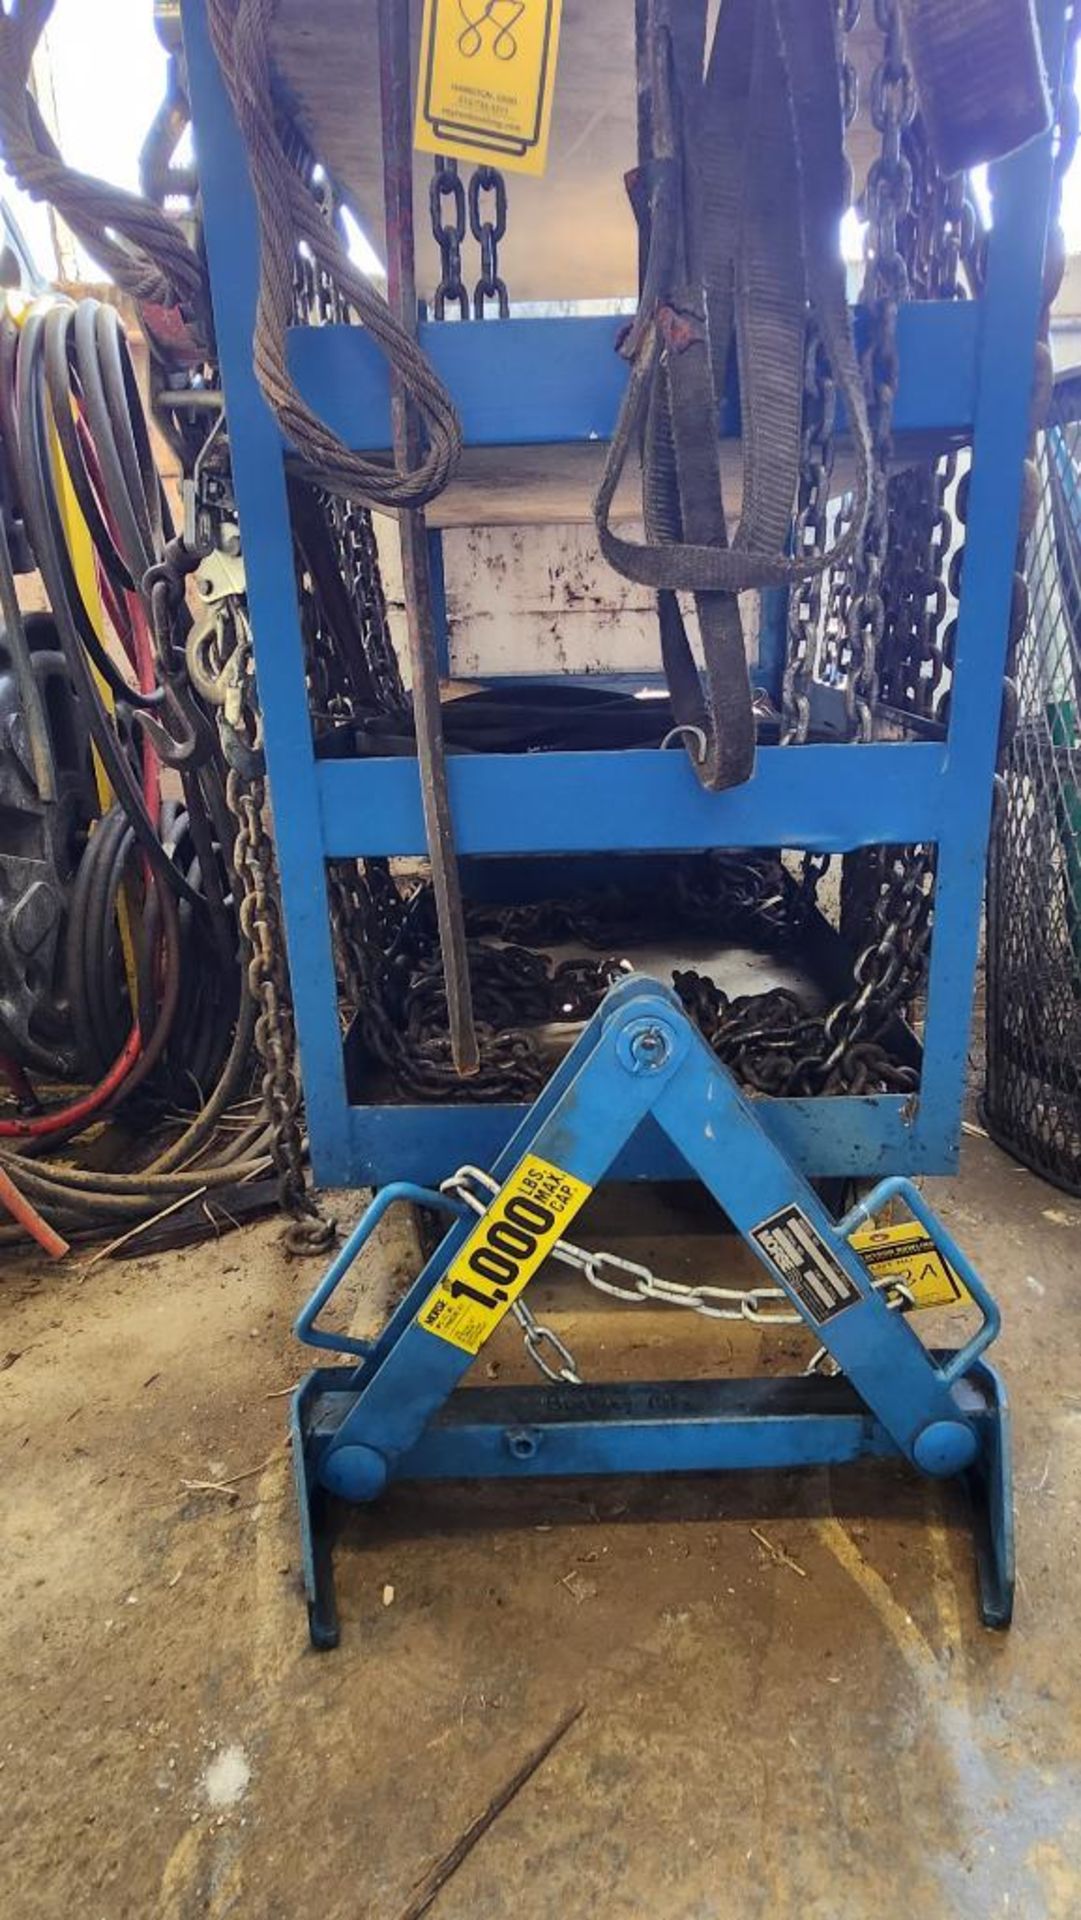 Steel Shop Cart w/ Content of Rigging Chains, Hooks, Eyebolts, Shackles, Rigging Harnesses - Image 3 of 5